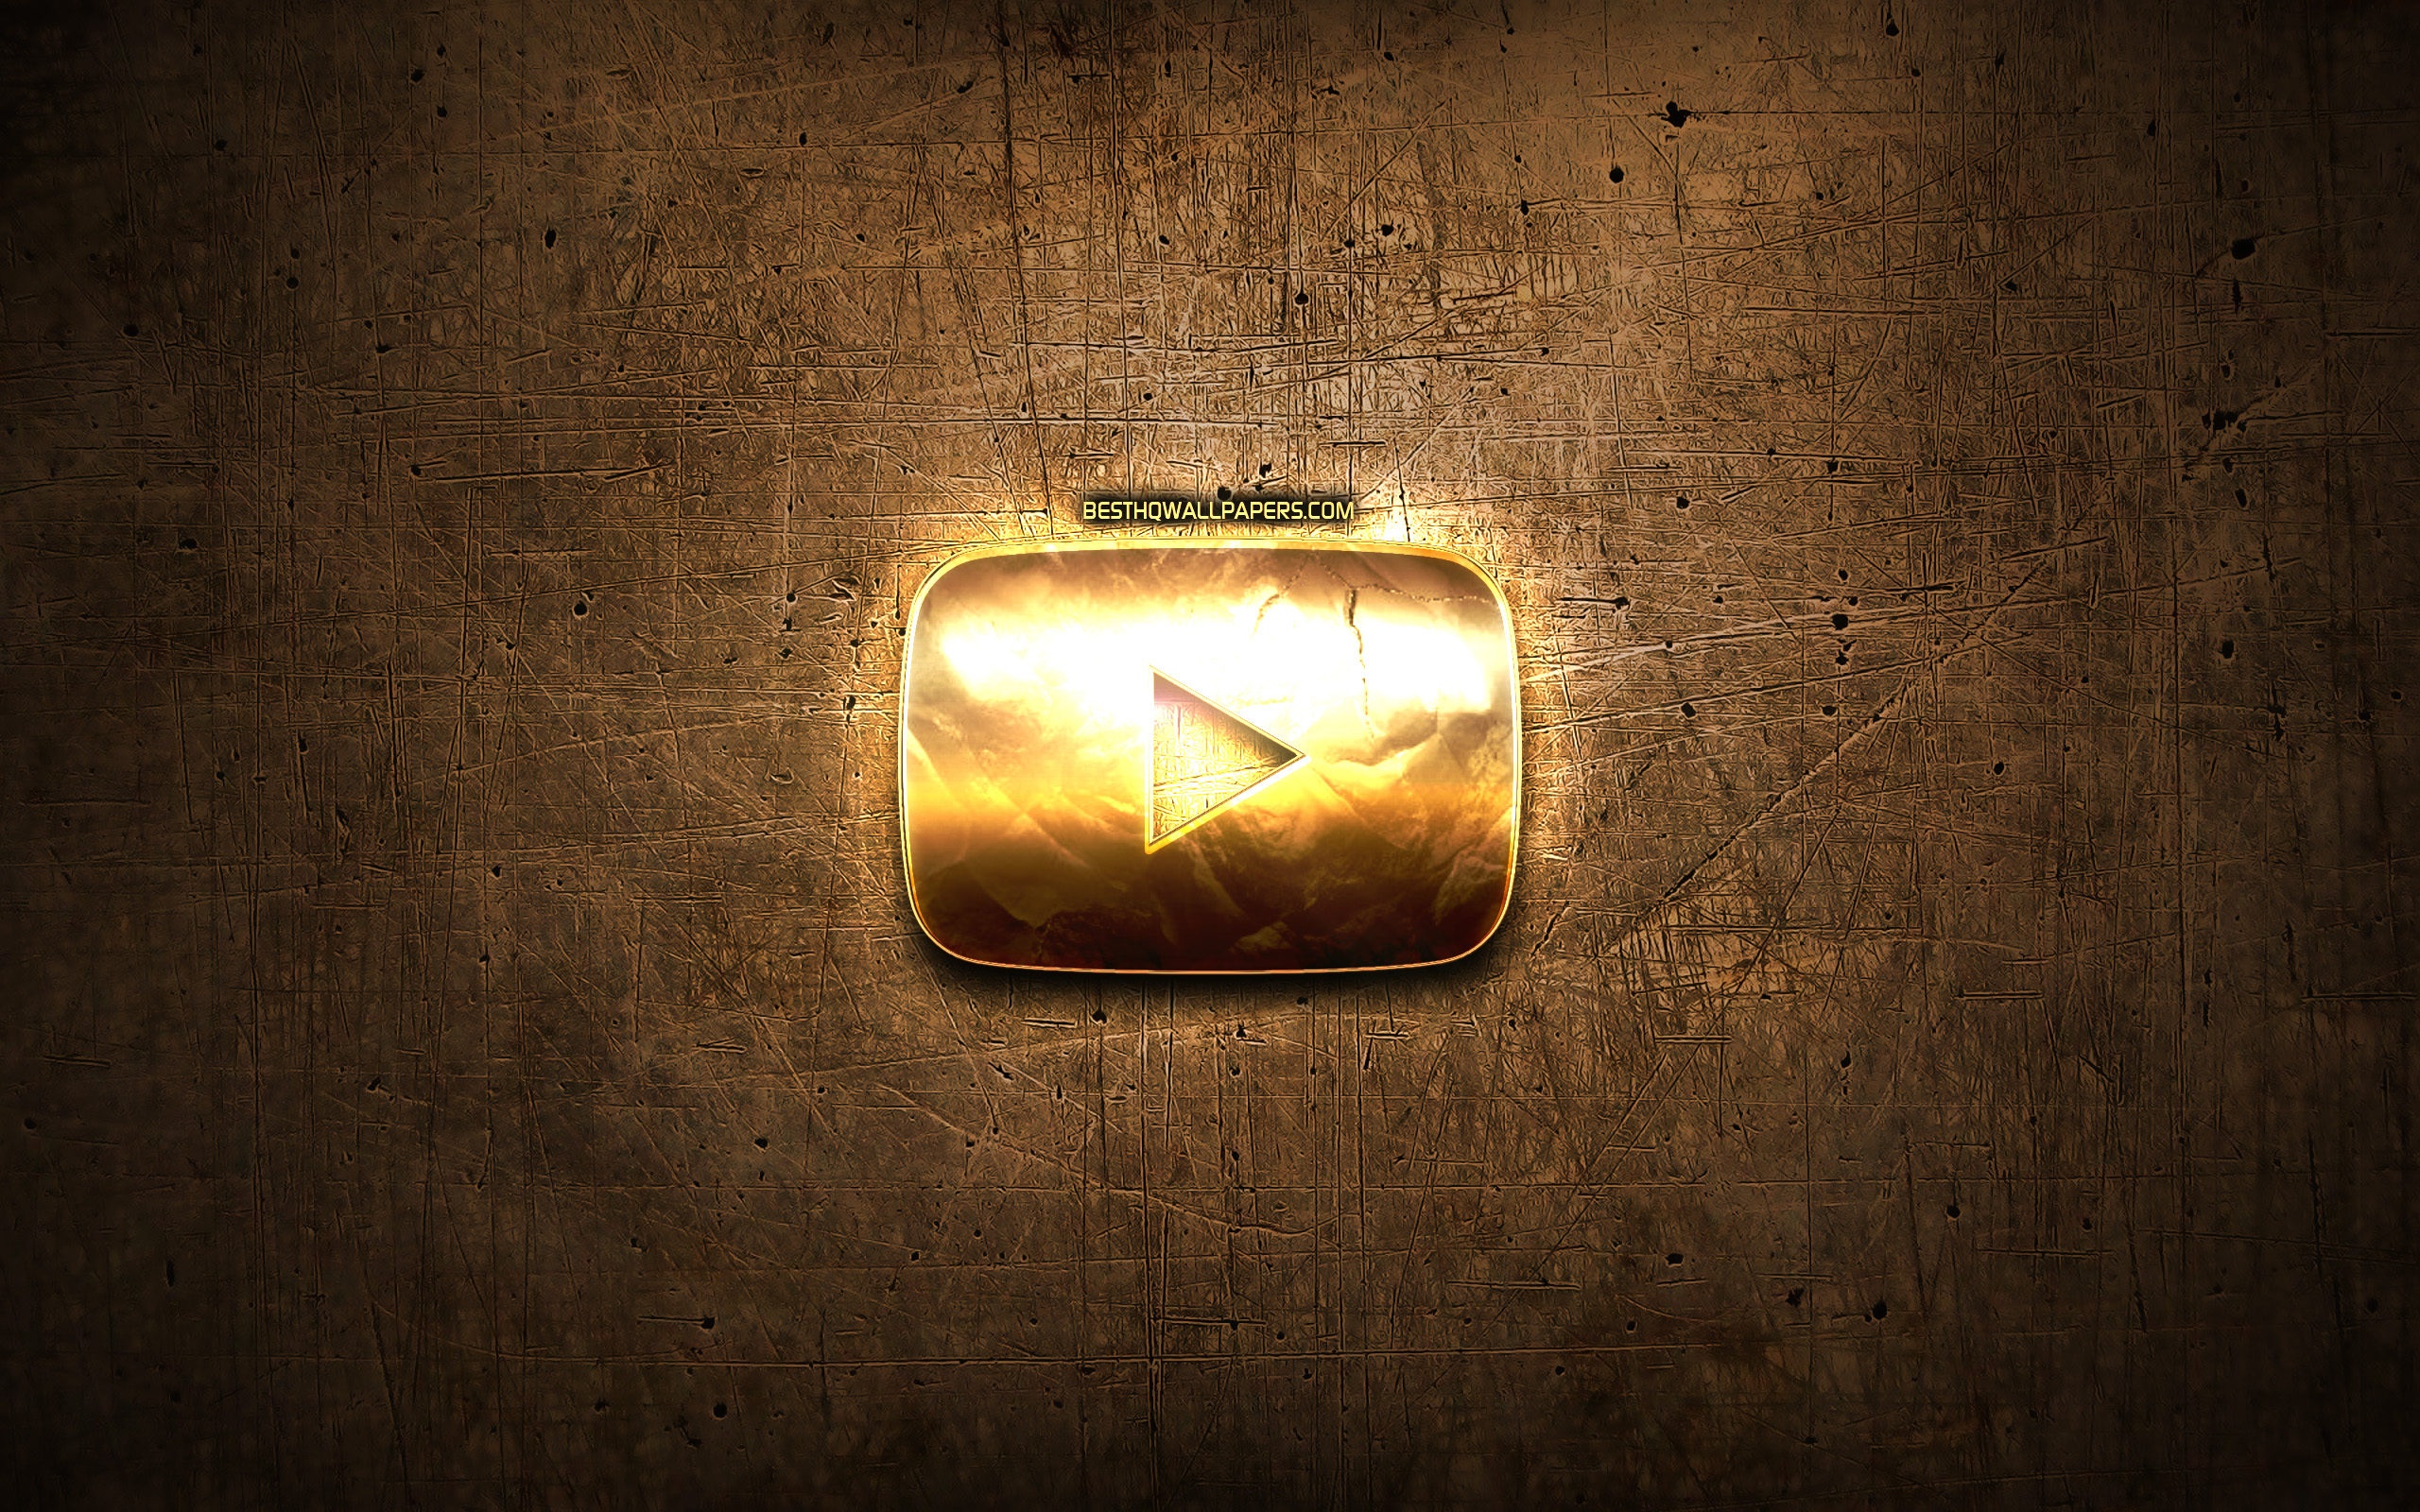 Download wallpaper Youtube golden button, artwork, brown metal background, Youtube golden logo, creative, Youtube logo, brands, Youtube for desktop with resolution 2560x1600. High Quality HD picture wallpaper